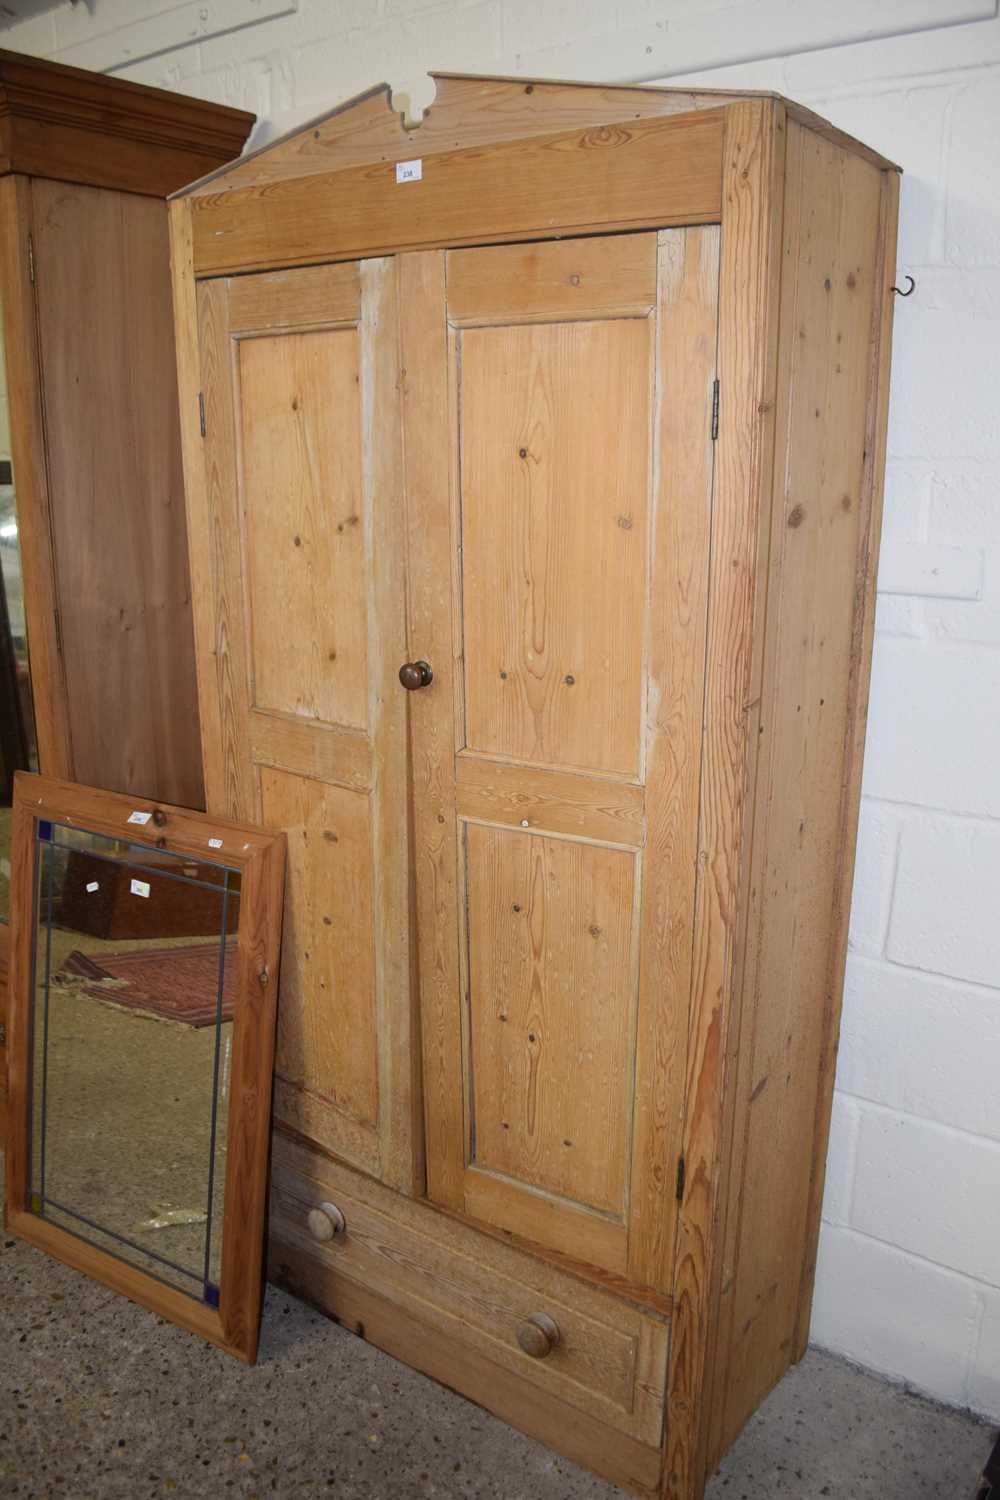 A small pine two door, one drawer wardrobe